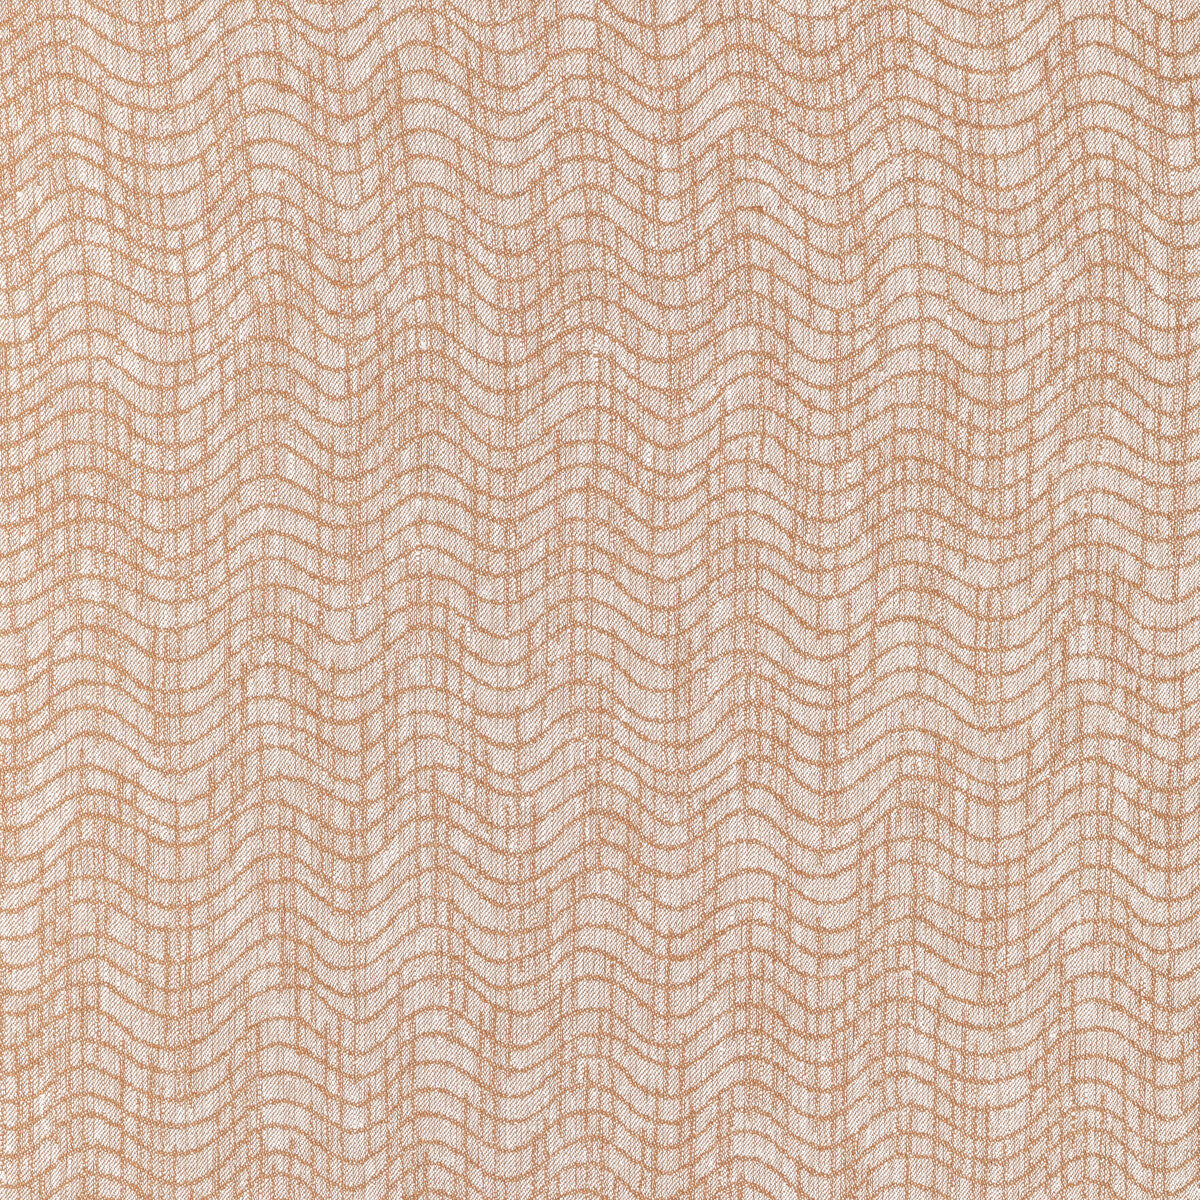 Dadami fabric in clay color - pattern GWF-3801.24.0 - by Lee Jofa Modern in the Kelly Wearstler VIII collection